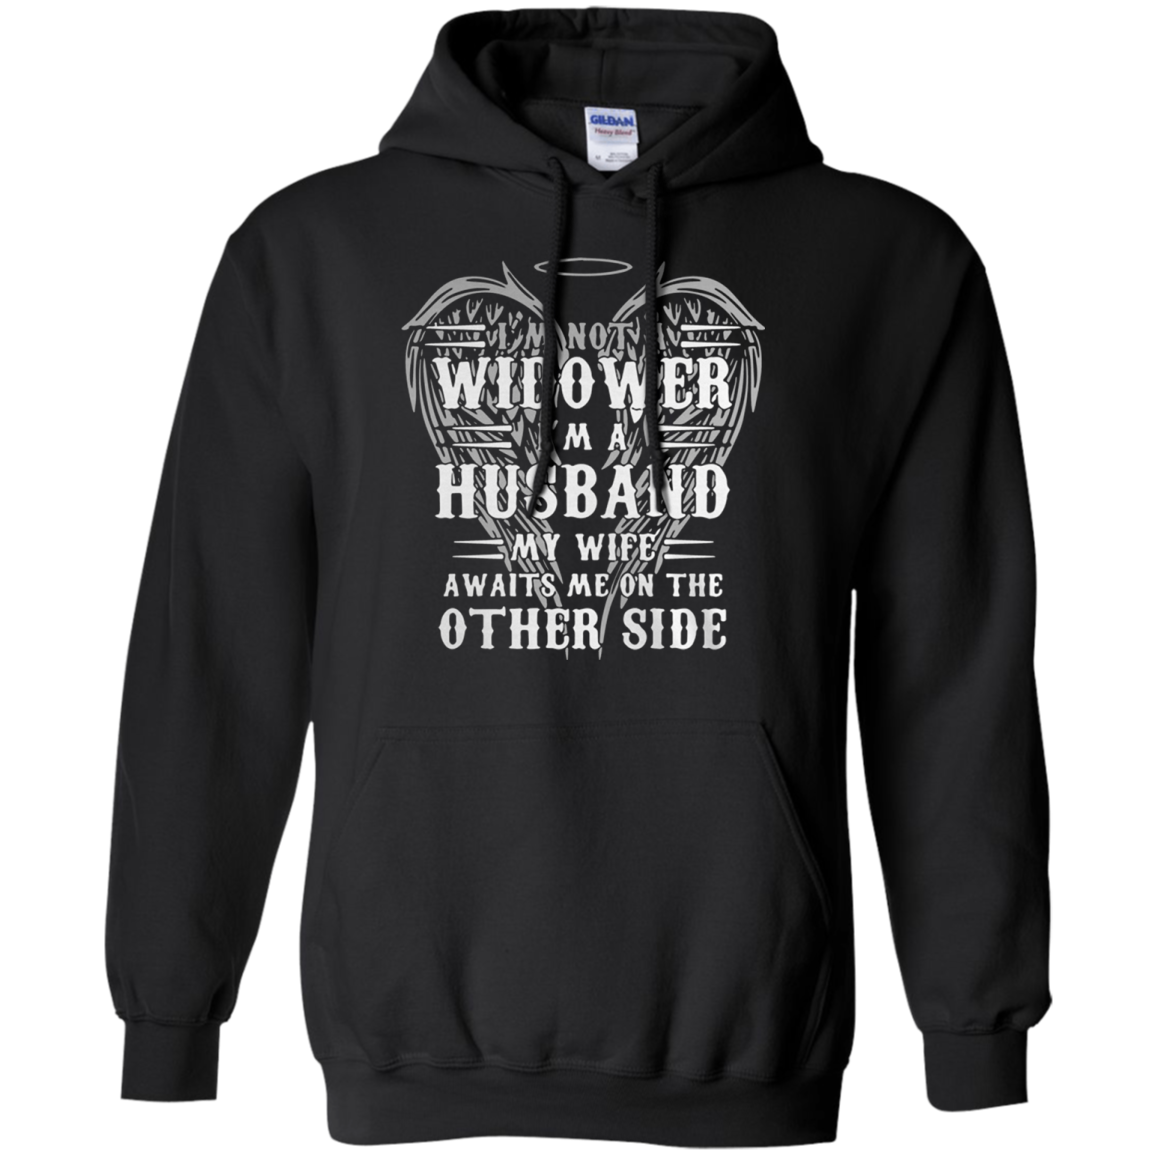 Order Iâ™m Not A Widower Iâ™m A Husband My Wife Awaits Me On The Other Side Shirt 